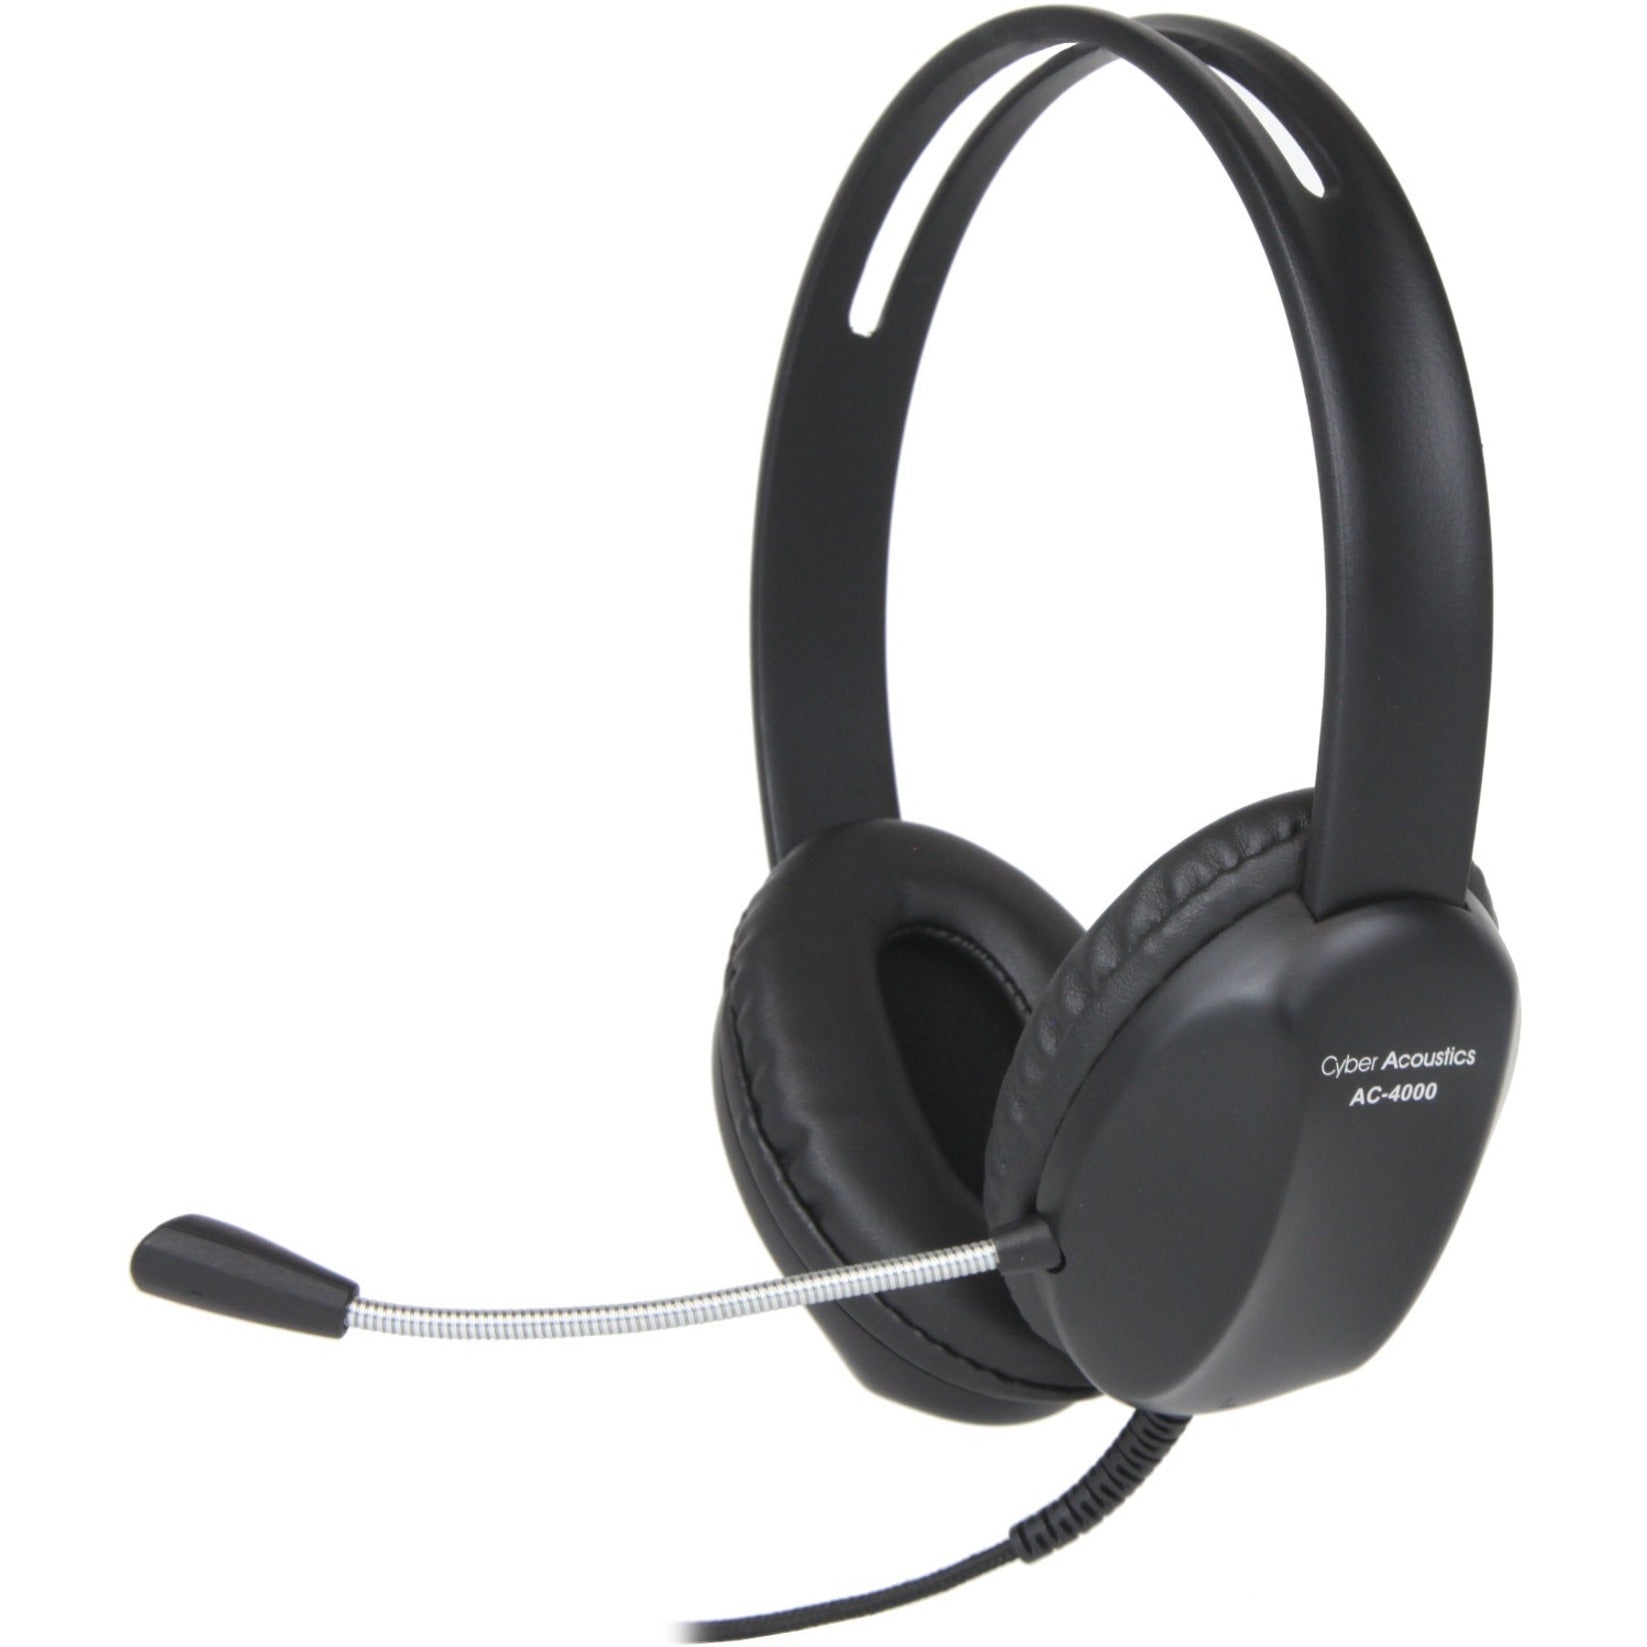 Cyber Acoustics AC-4000 Headset, Binaural Over-the-head Stereo Wired Headset